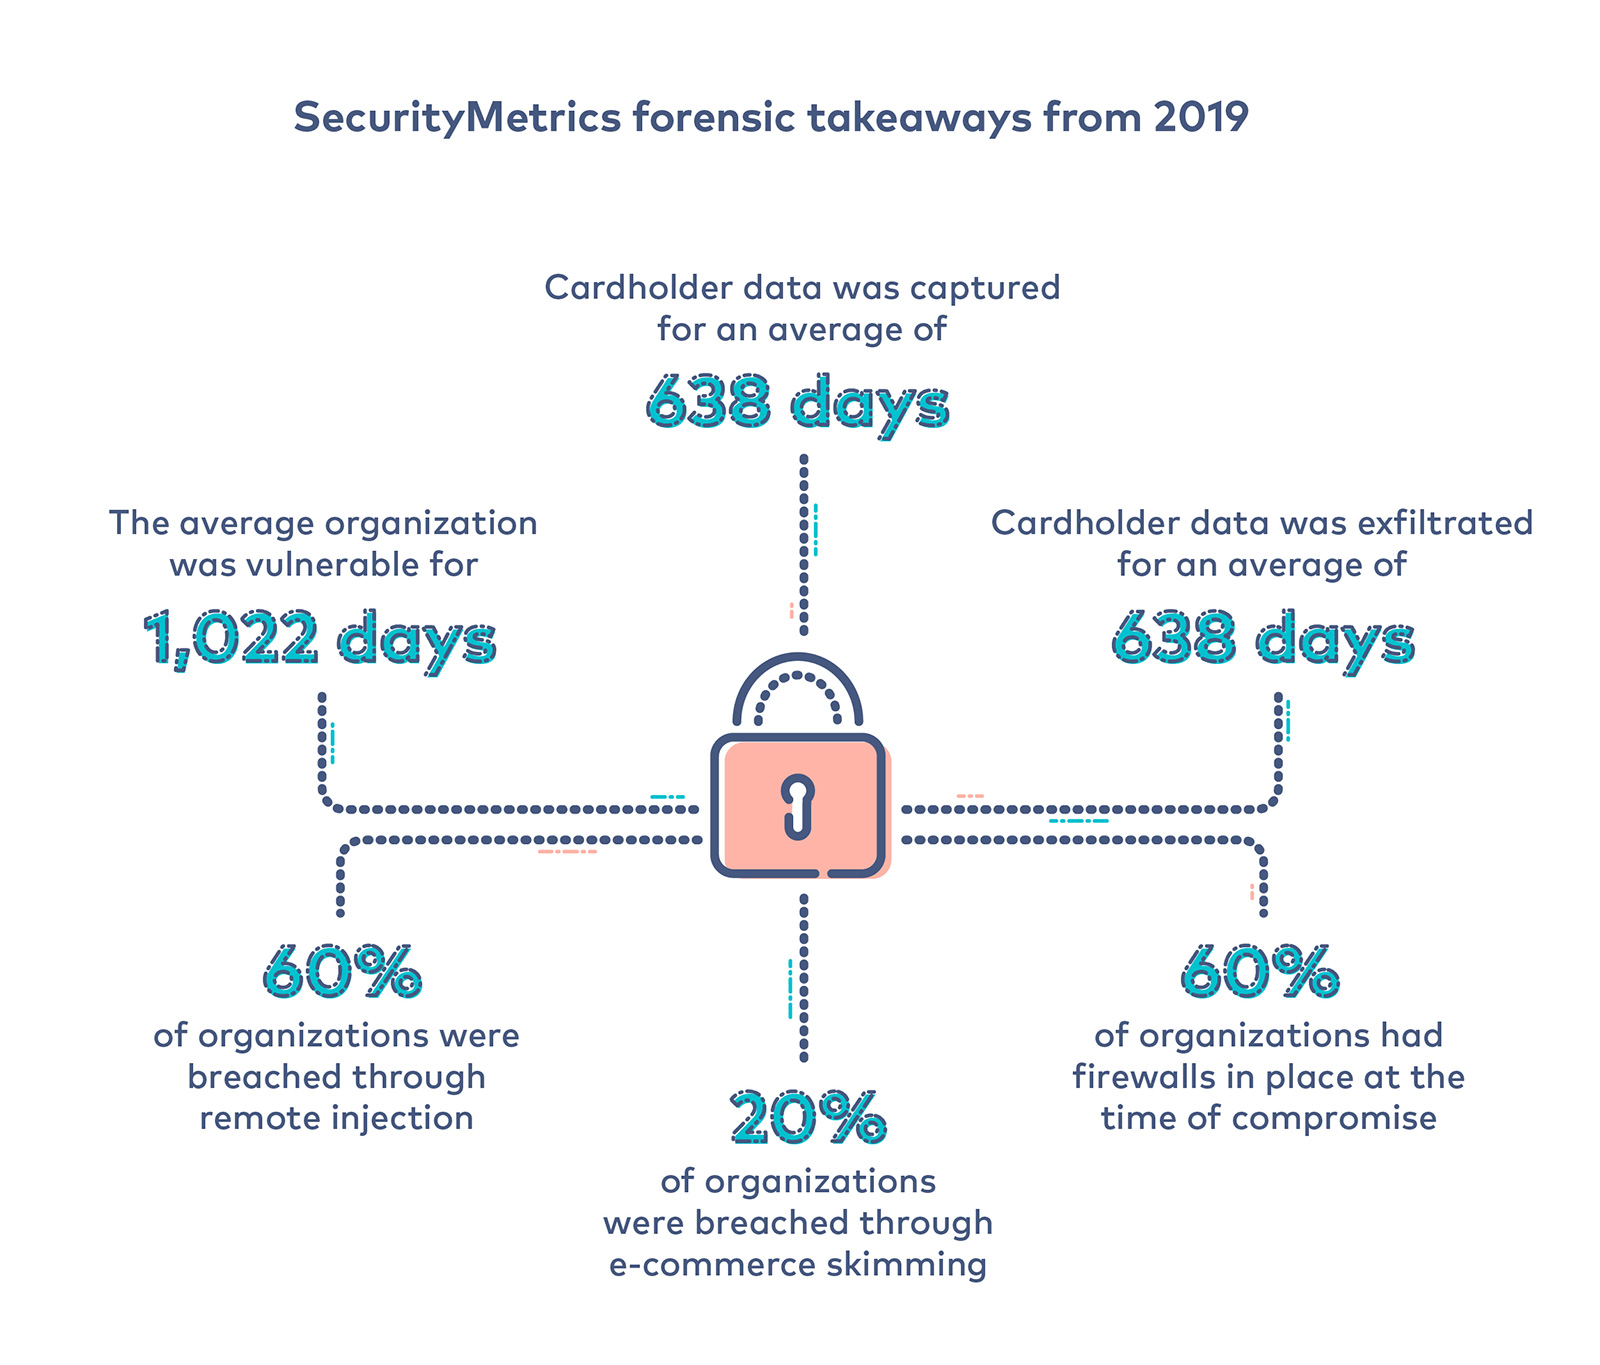 PCI Compliance, what you need to know - illustration showing SecurityMetrics forensic takeaways from 2019.